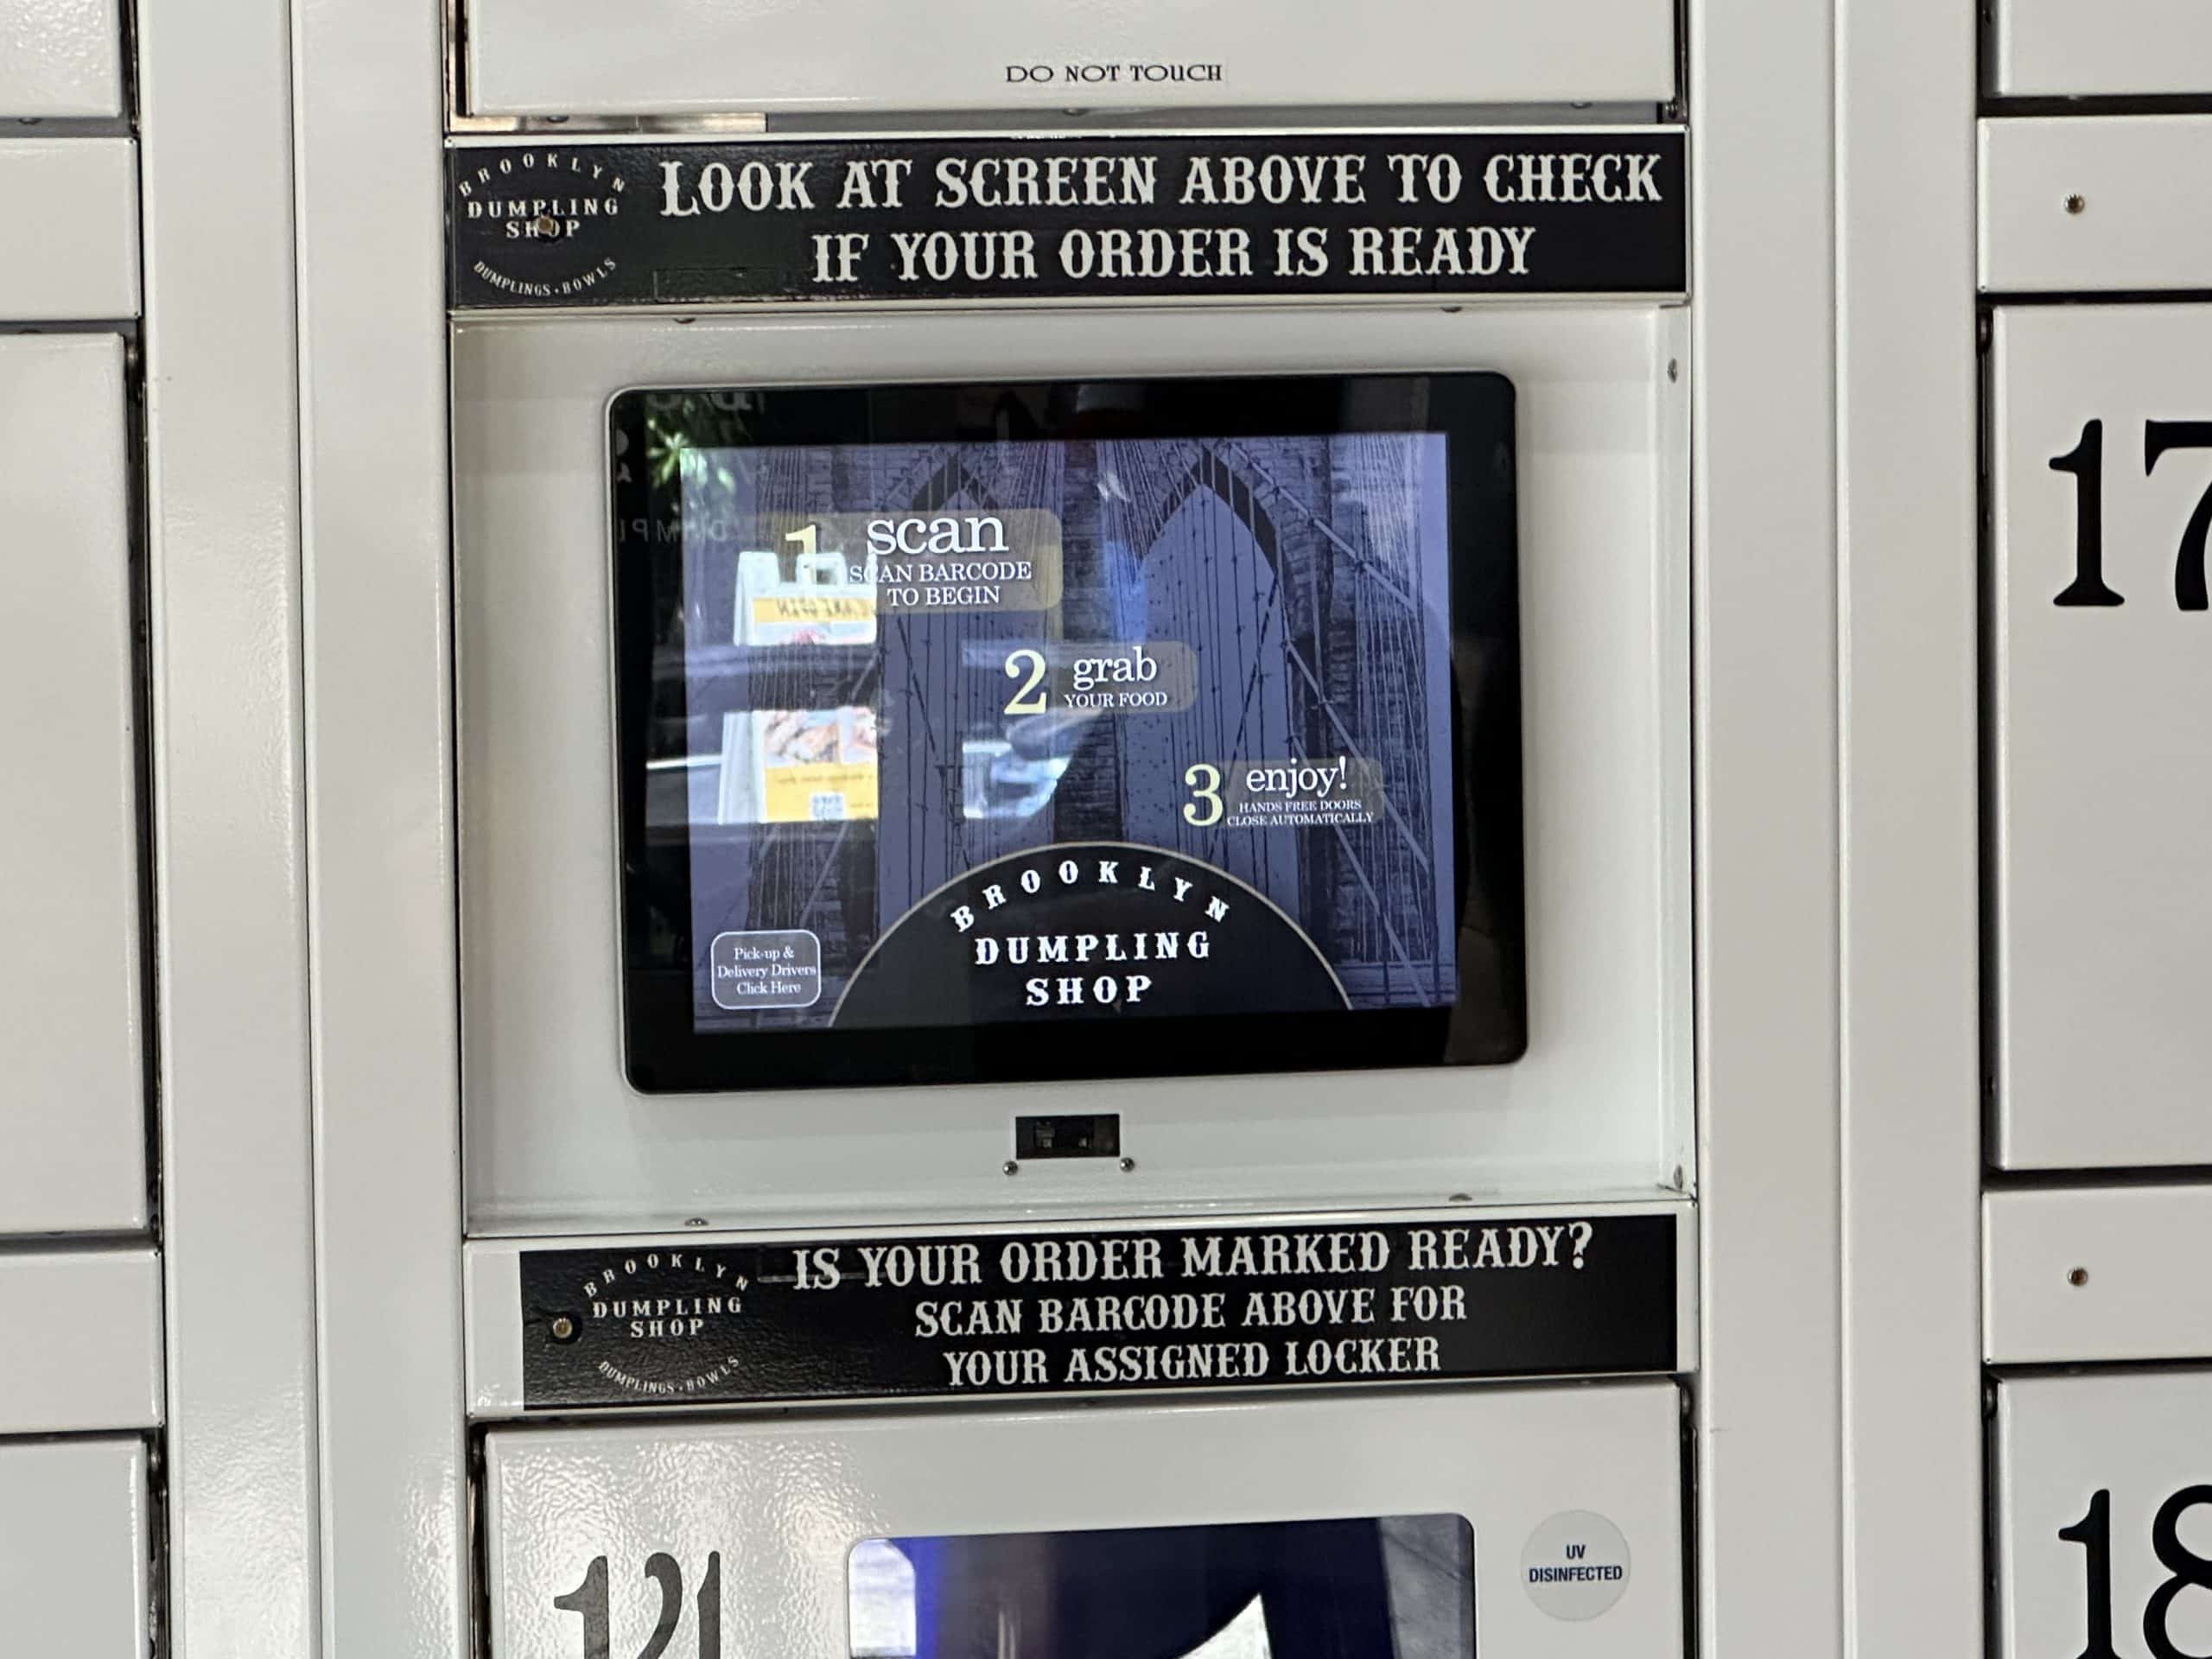 When your food is ready, scan your bar code and the automat door will open | Upper East Site